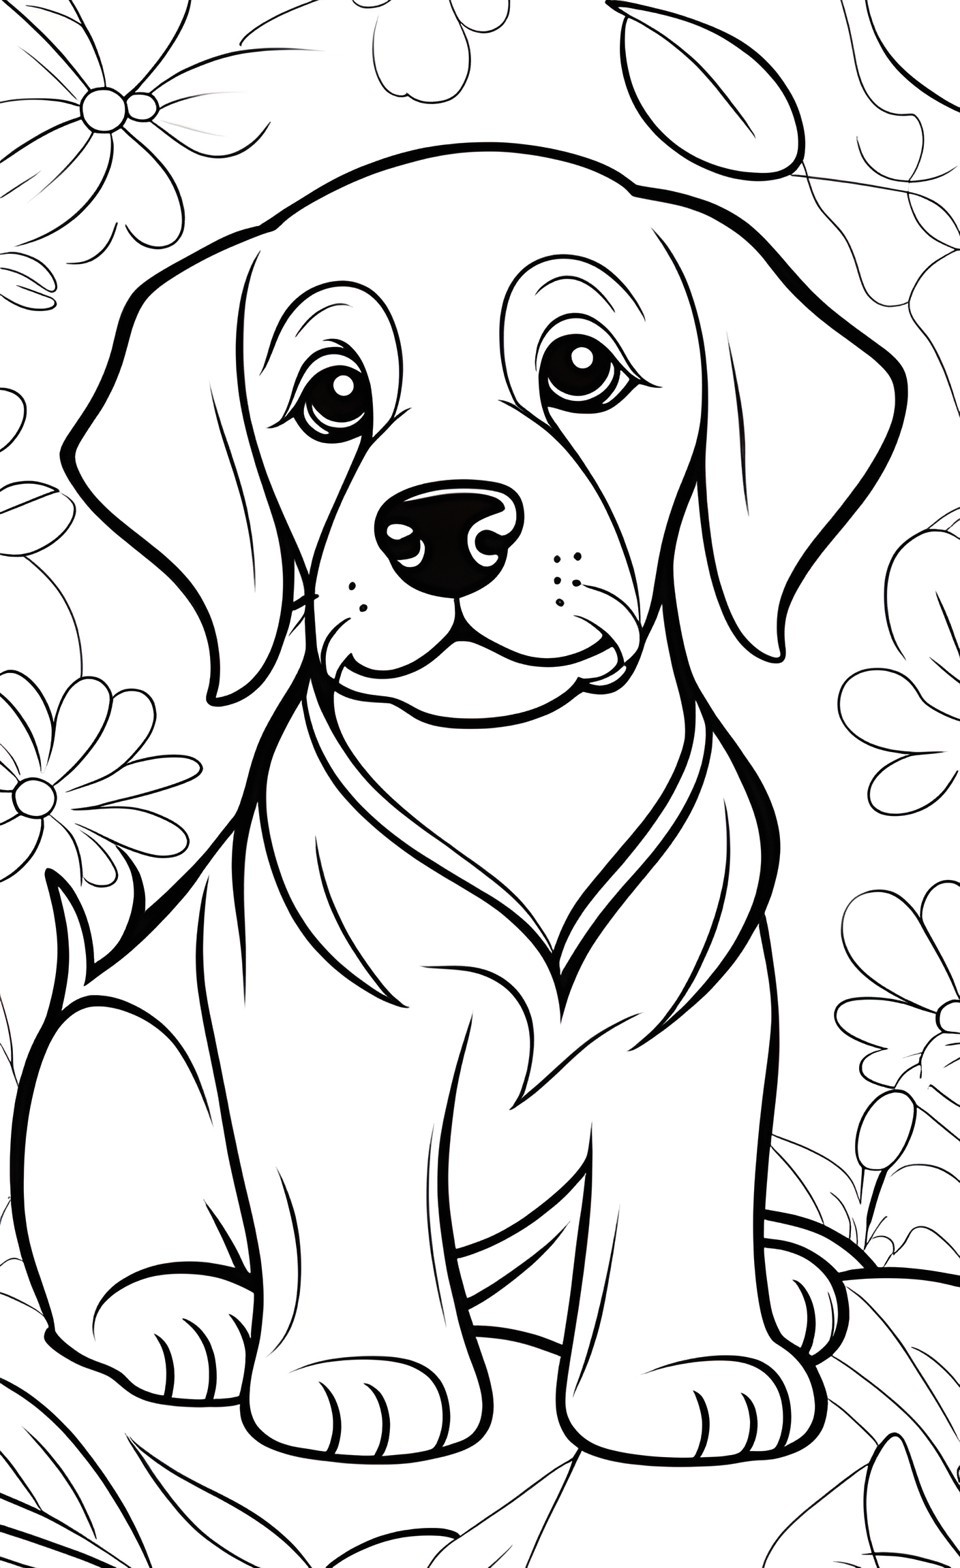 simple dog coloring pages for kids #7